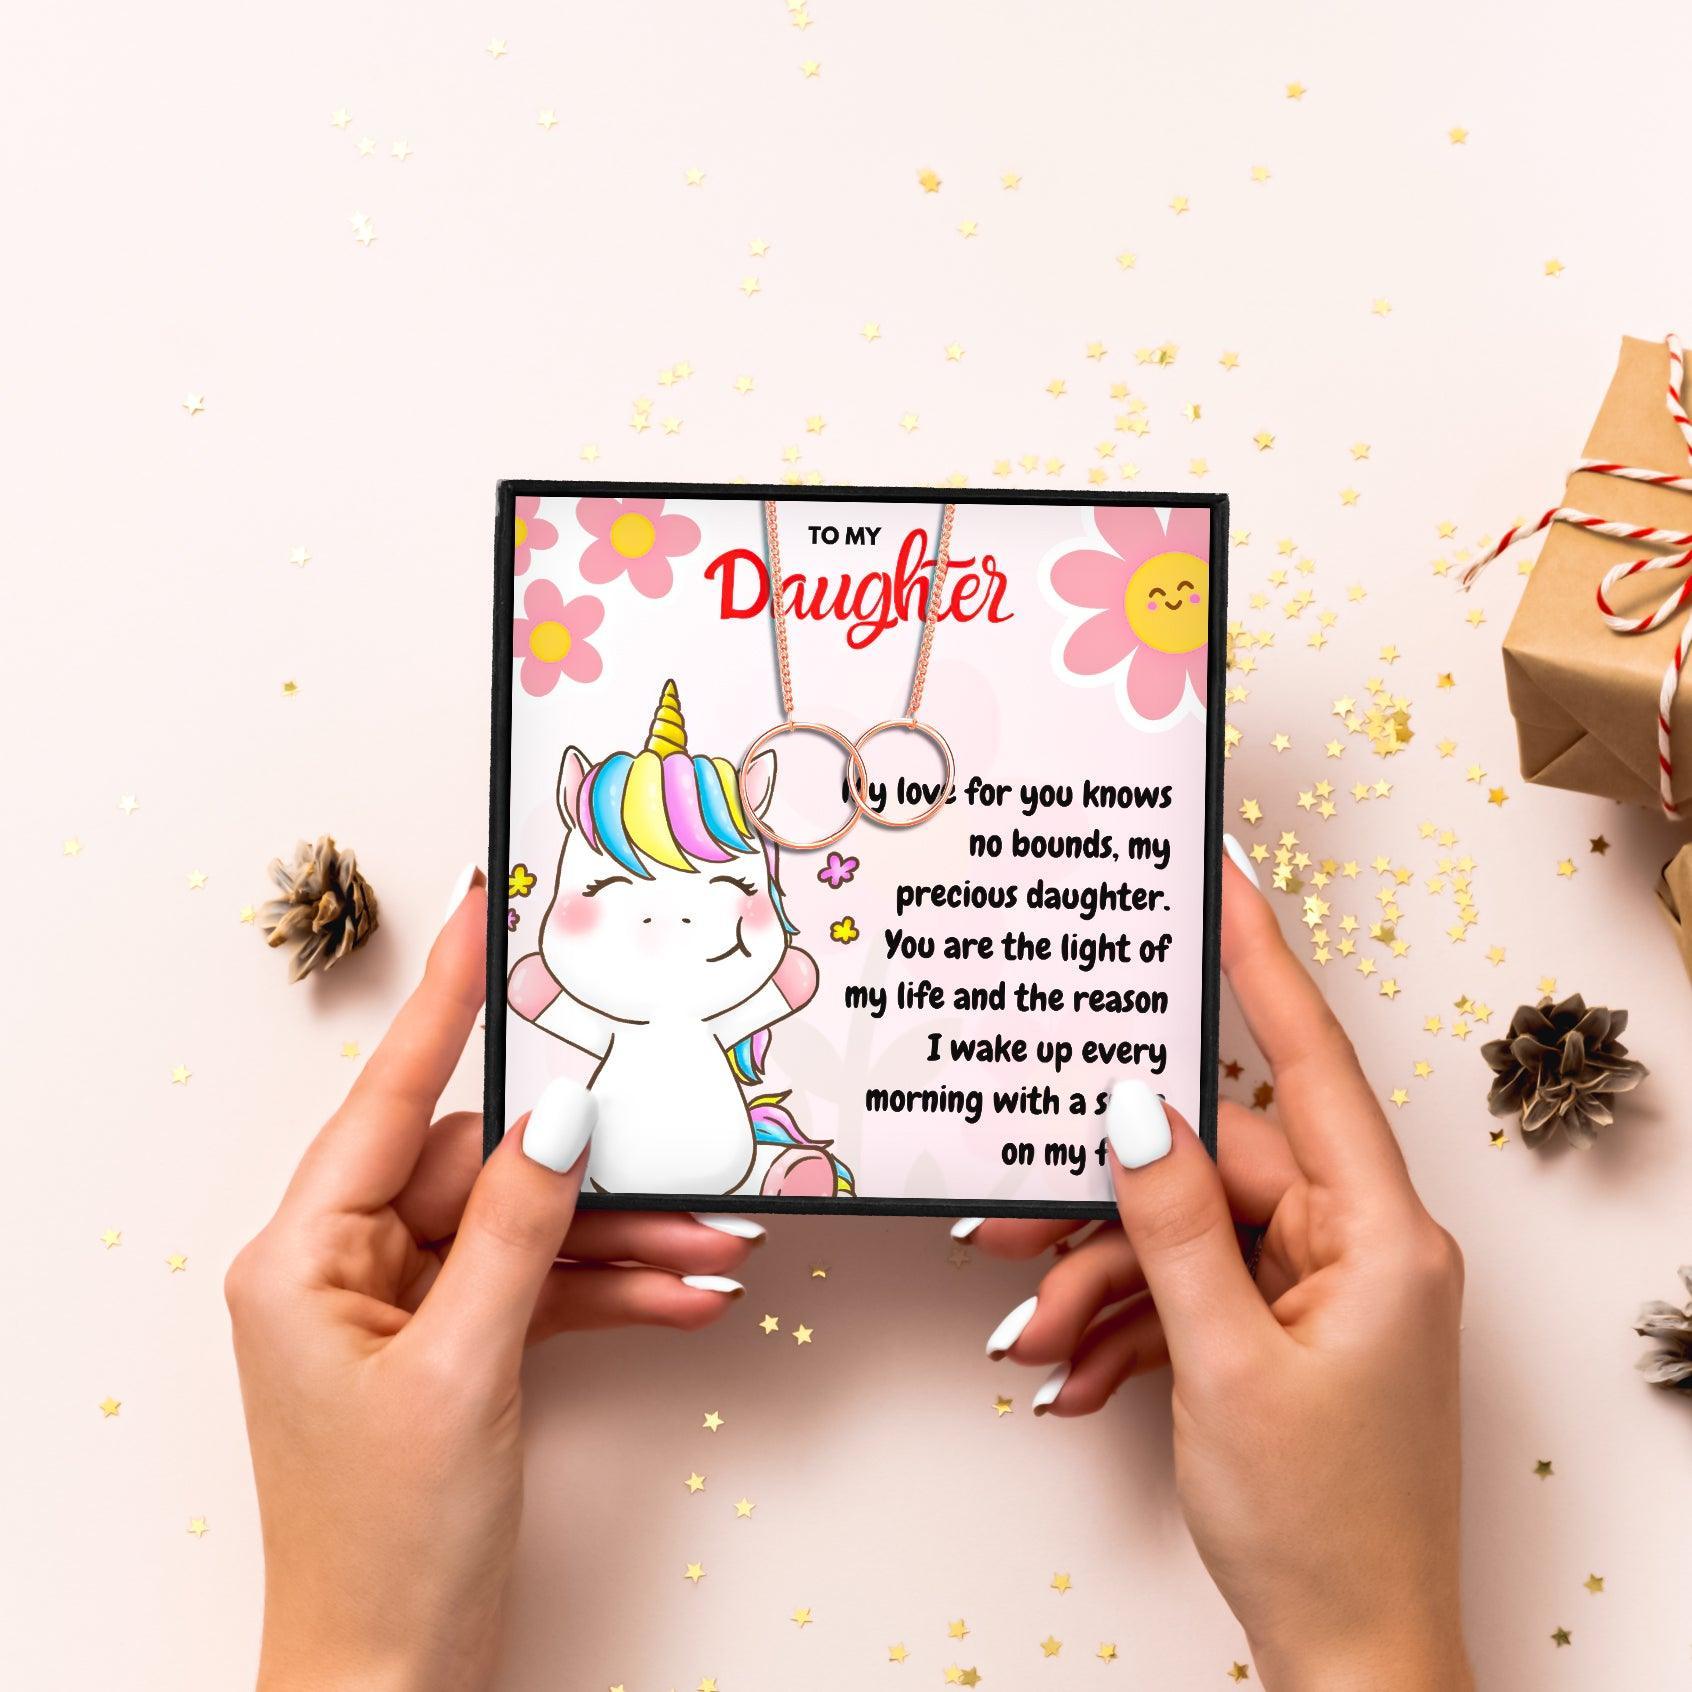 Necklace Message Card Gift Set For Daughter in 2023 | Necklace Message Card Gift Set For Daughter - undefined | daughter gift ideas, Daughter Necklace, Meaningful Daughter Necklaces, Mother Daughter Necklace, To my daughter necklace from mom | From Hunny Life | hunnylife.com